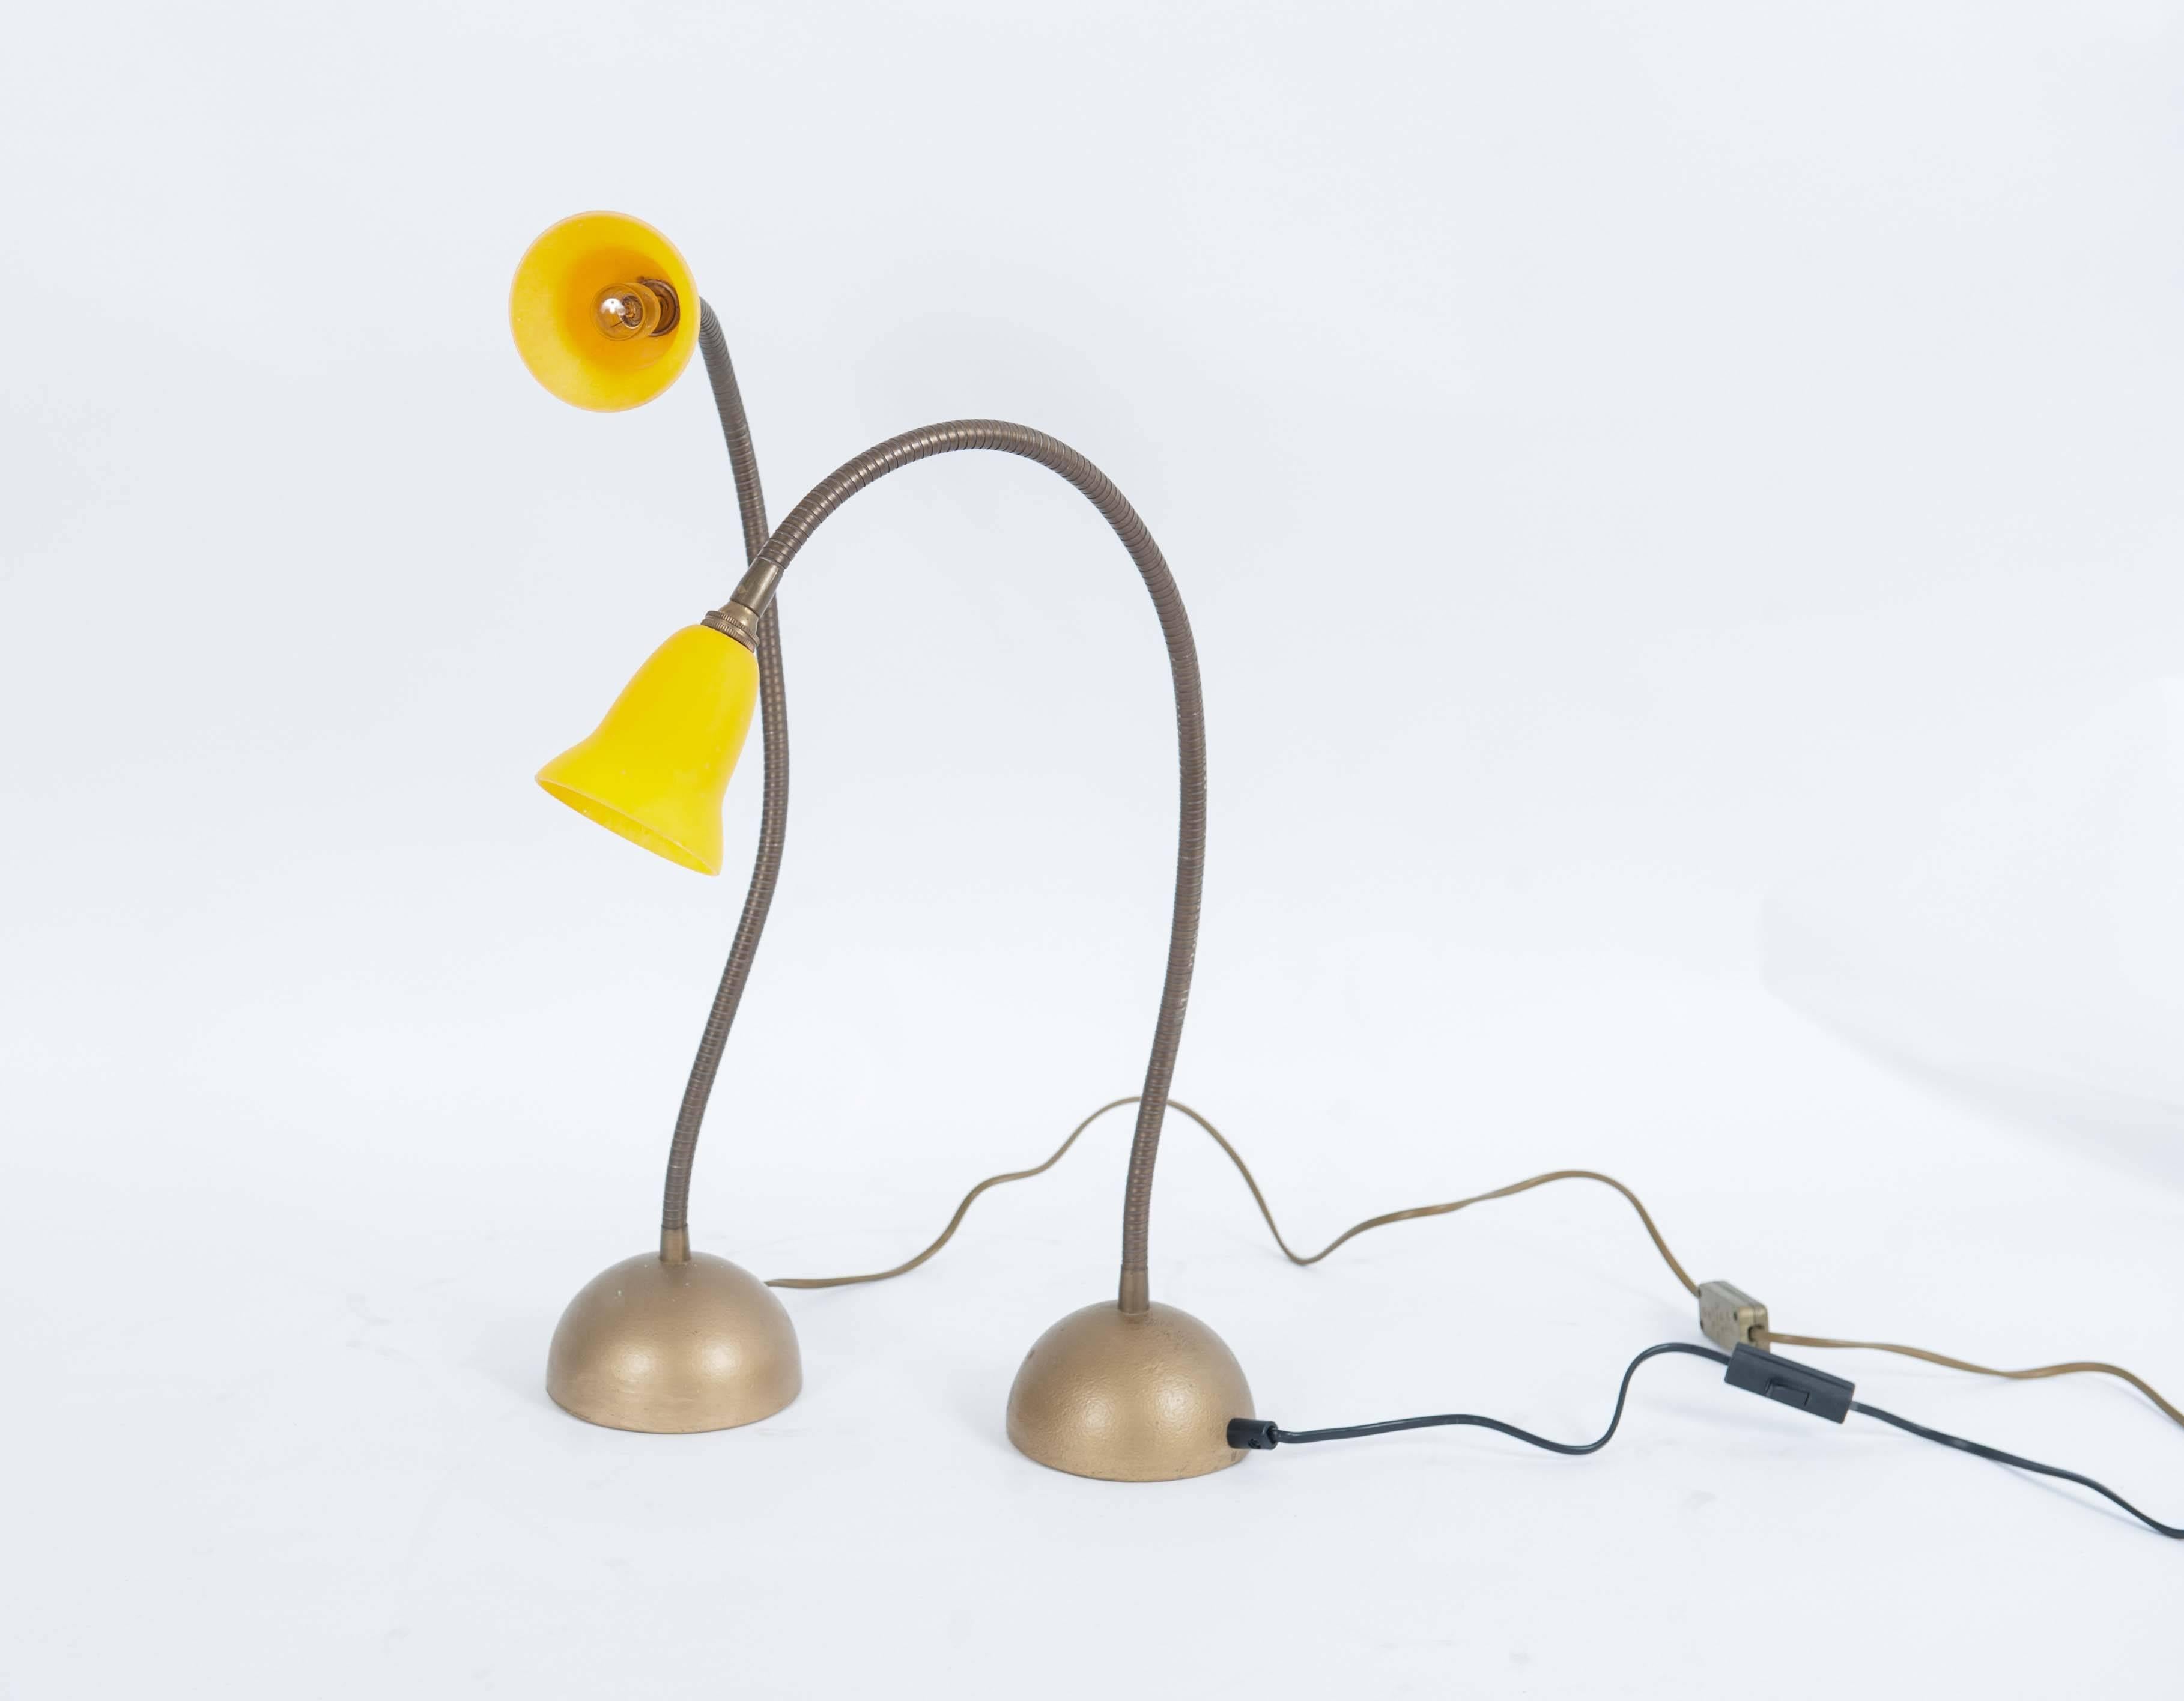 An elegant set of Dutch table lamps designed by Rob Nollet in the 1980s. 

The heavy cast iron base holds a bending arm in which the yellow glass lampshades have been fitted.

The bases and bending arms are flat gold-colored. Multi-functionality